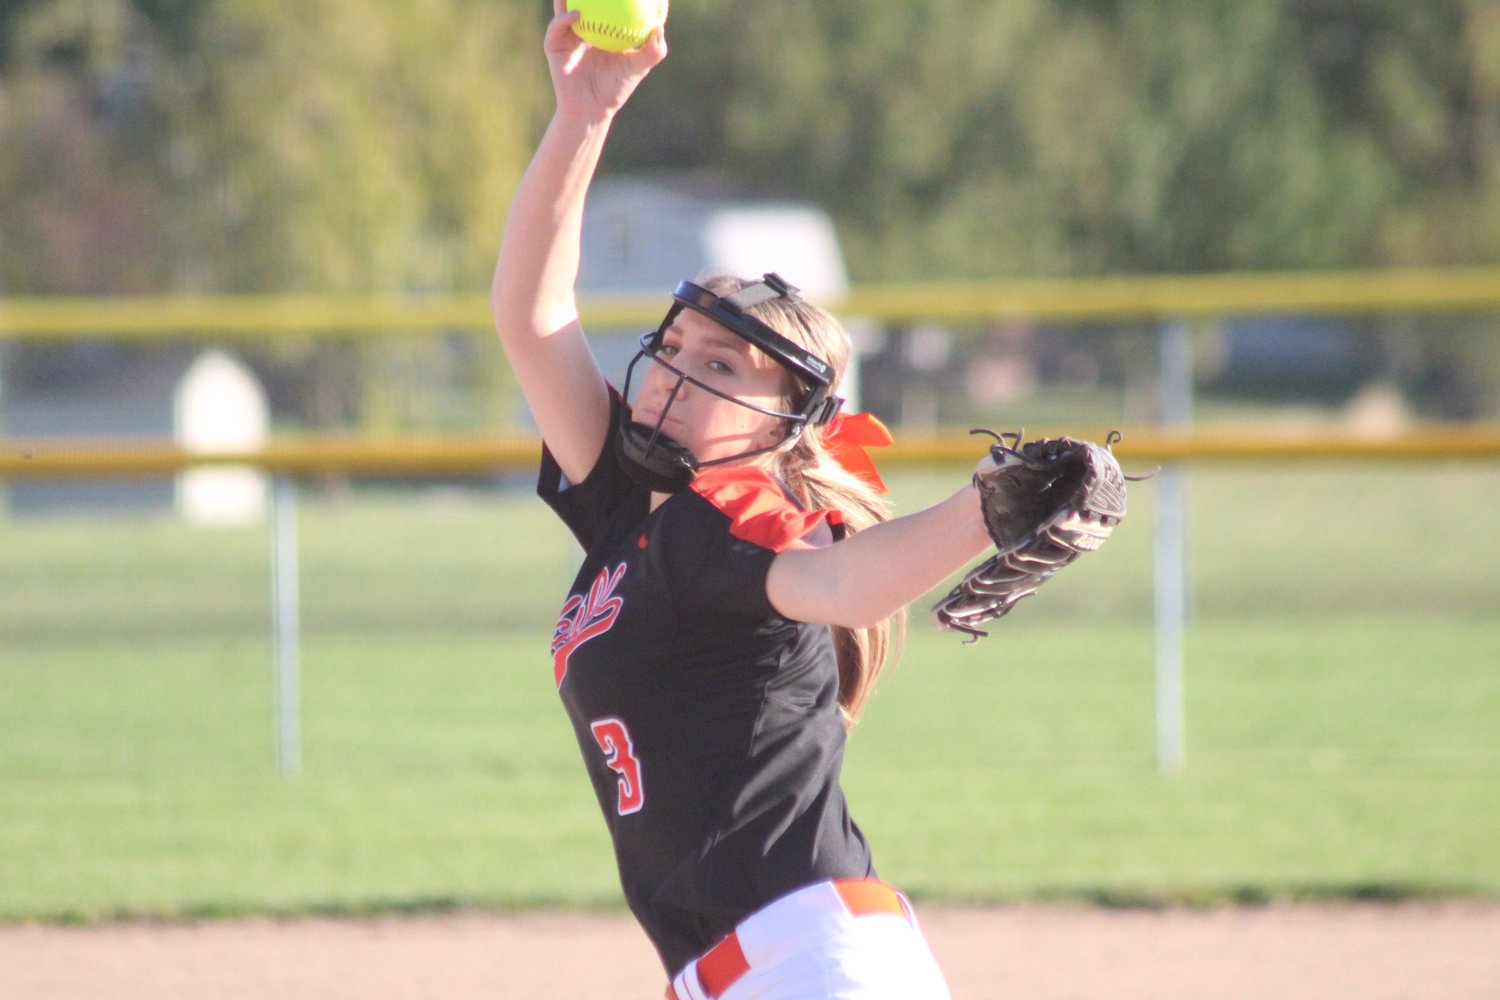 Kirksville senior pitcher Audrey Danielson delivers the ball during the first inning of Tuesday's game against Hannibal.